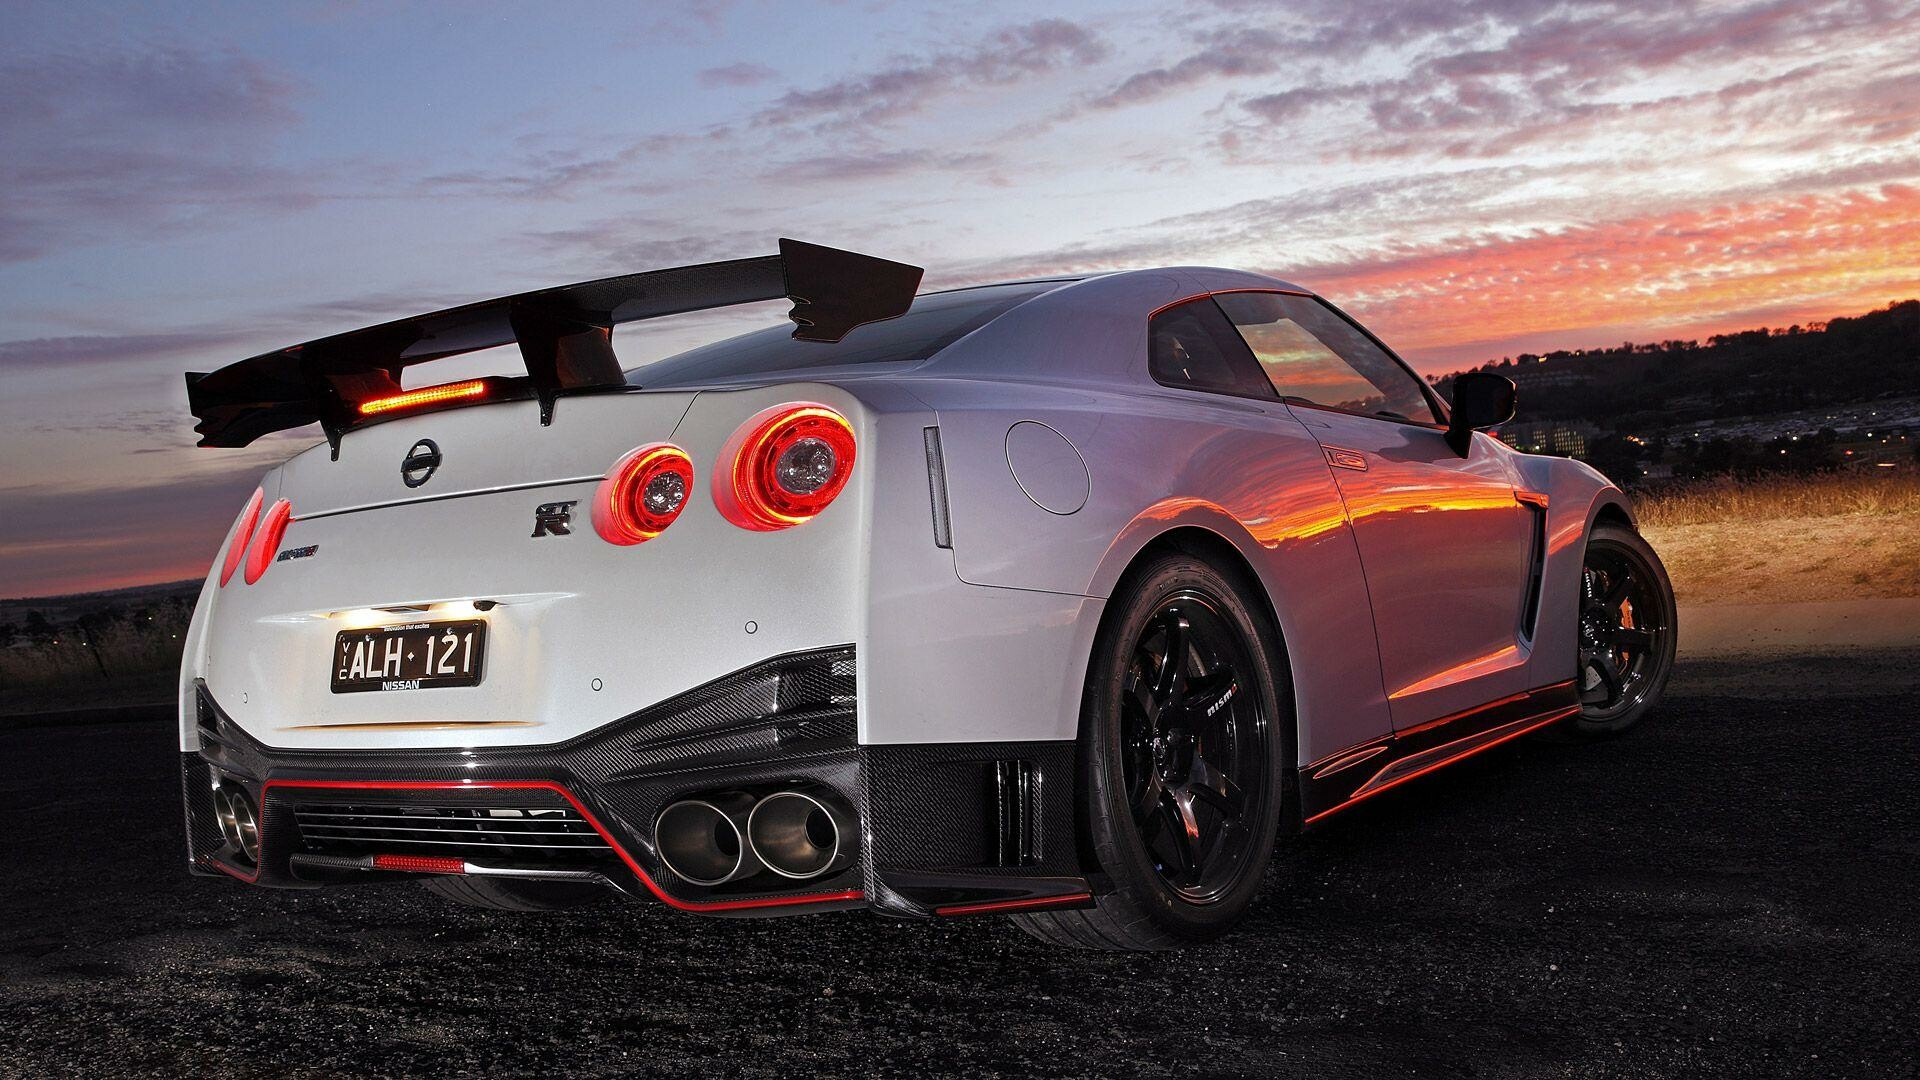 Nissan: GT-R, Nismo, Founded in September 1984 as a specialist company to support Nissan's motorsports activities. 1920x1080 Full HD Background.